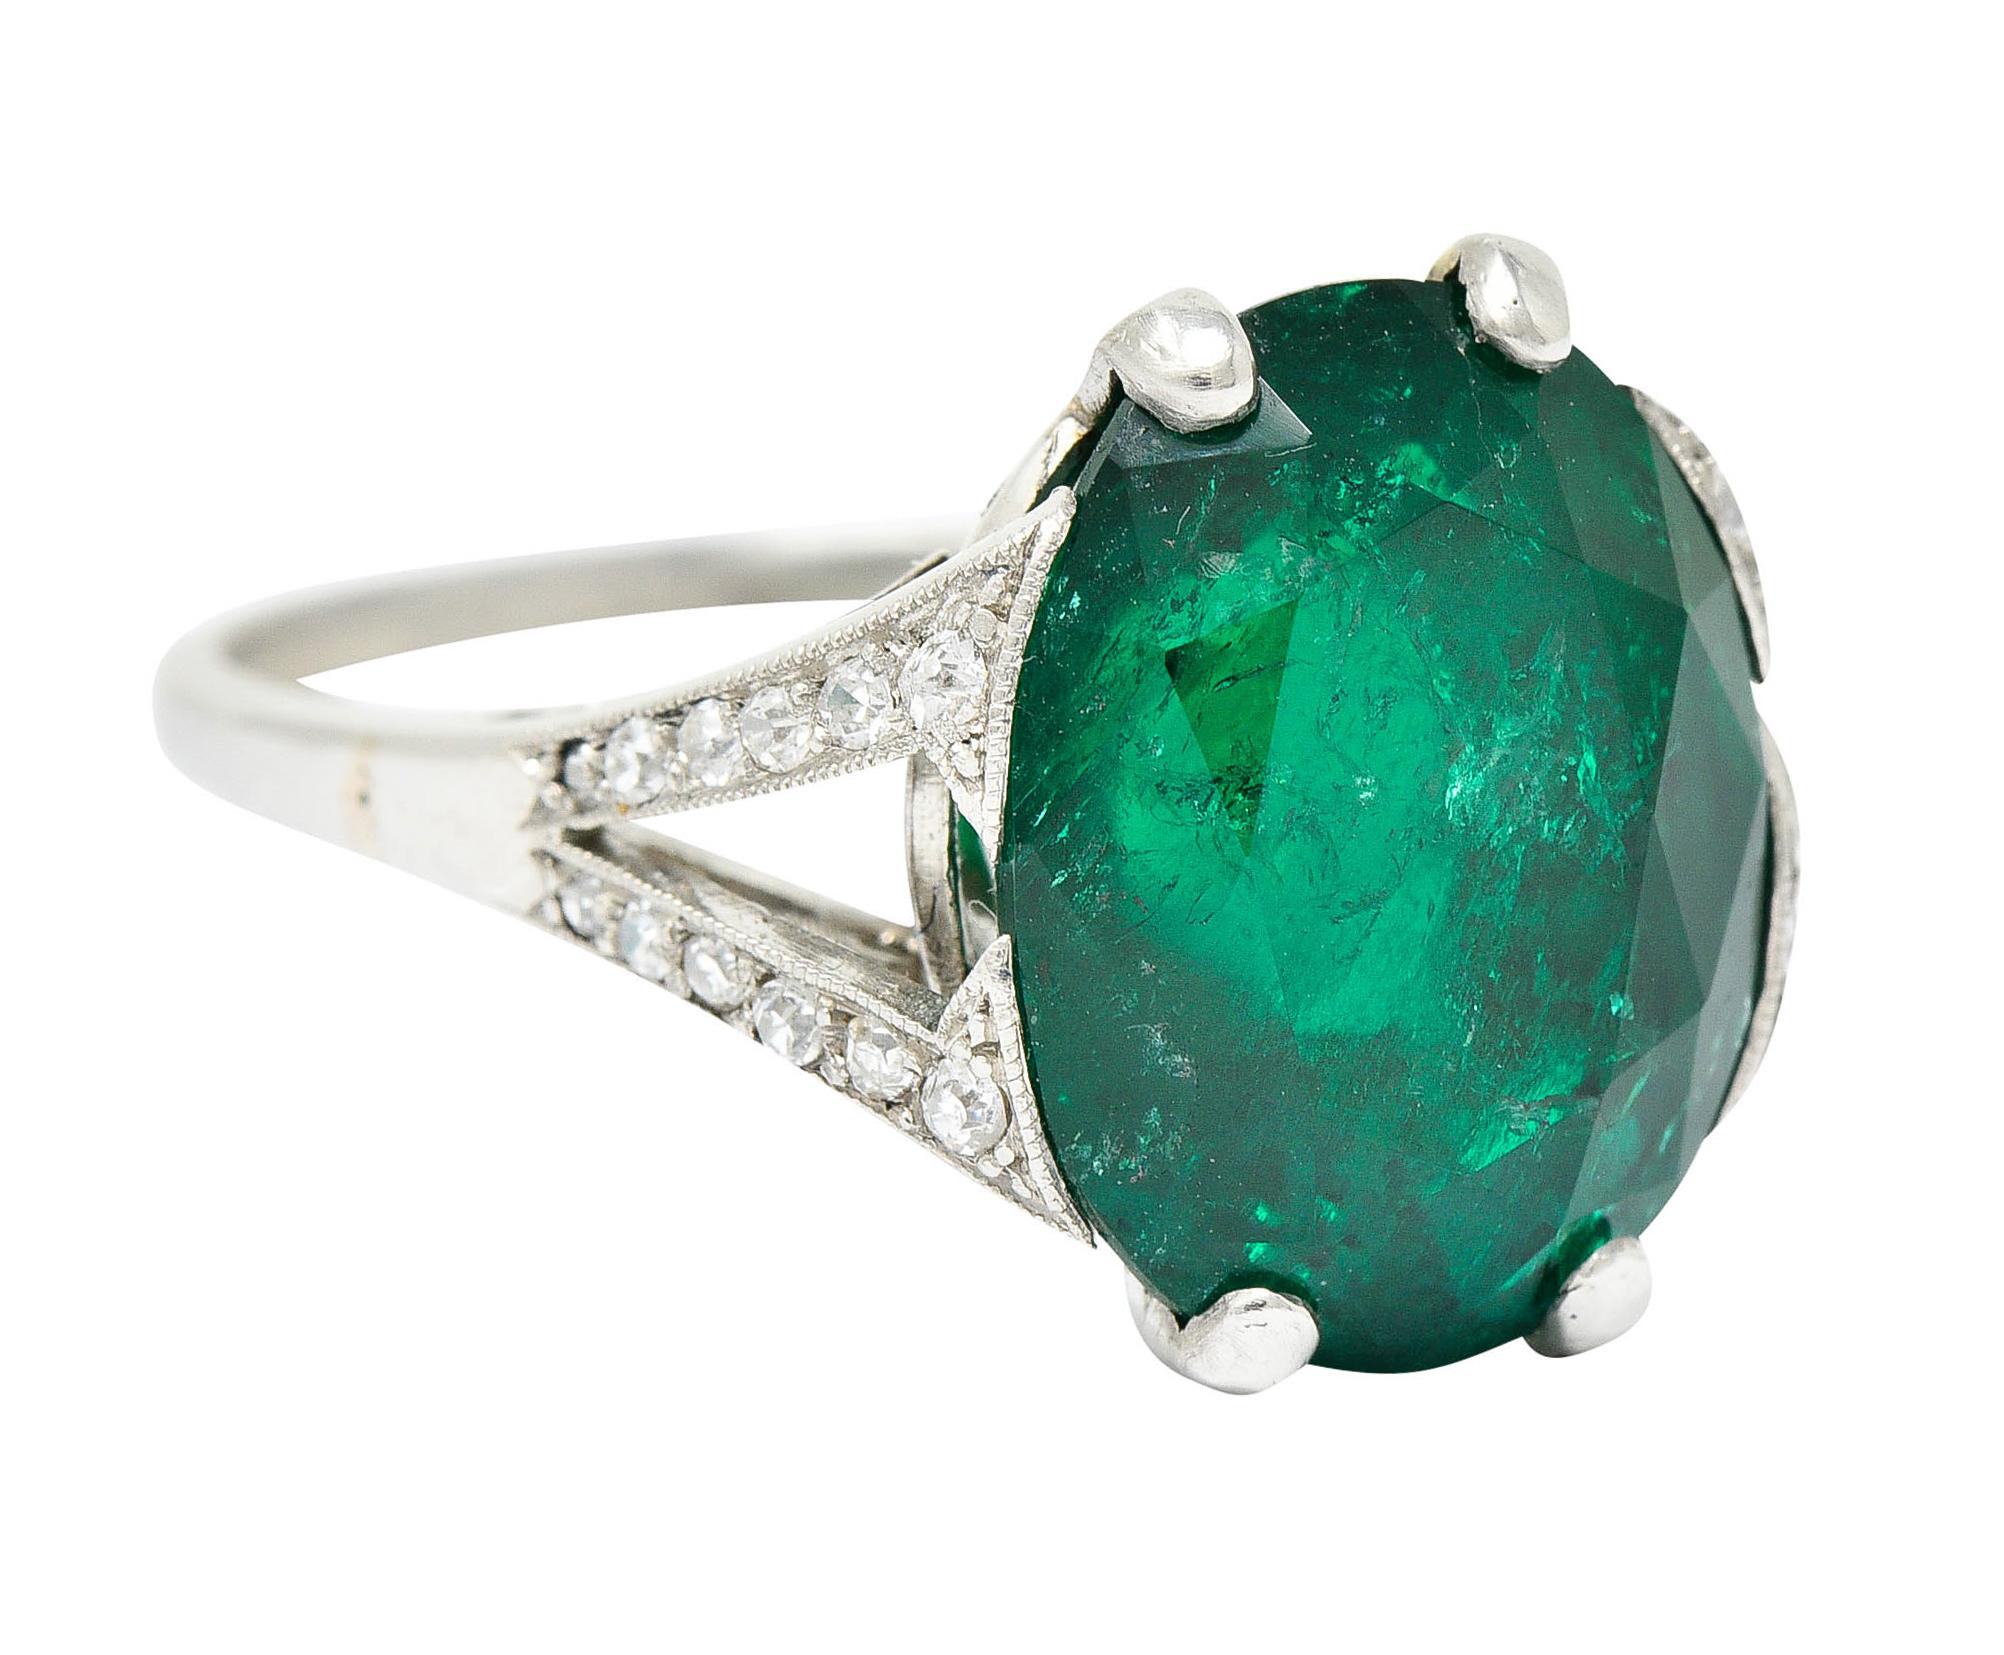 Basket cathedral style statement ring with elegantly scrolled gallery

Centering an oval cut Colombian emerald weighing approximately 7.10 carats
Bright saturated green in color and semi-transparent with natural inclusions - moderate clarity